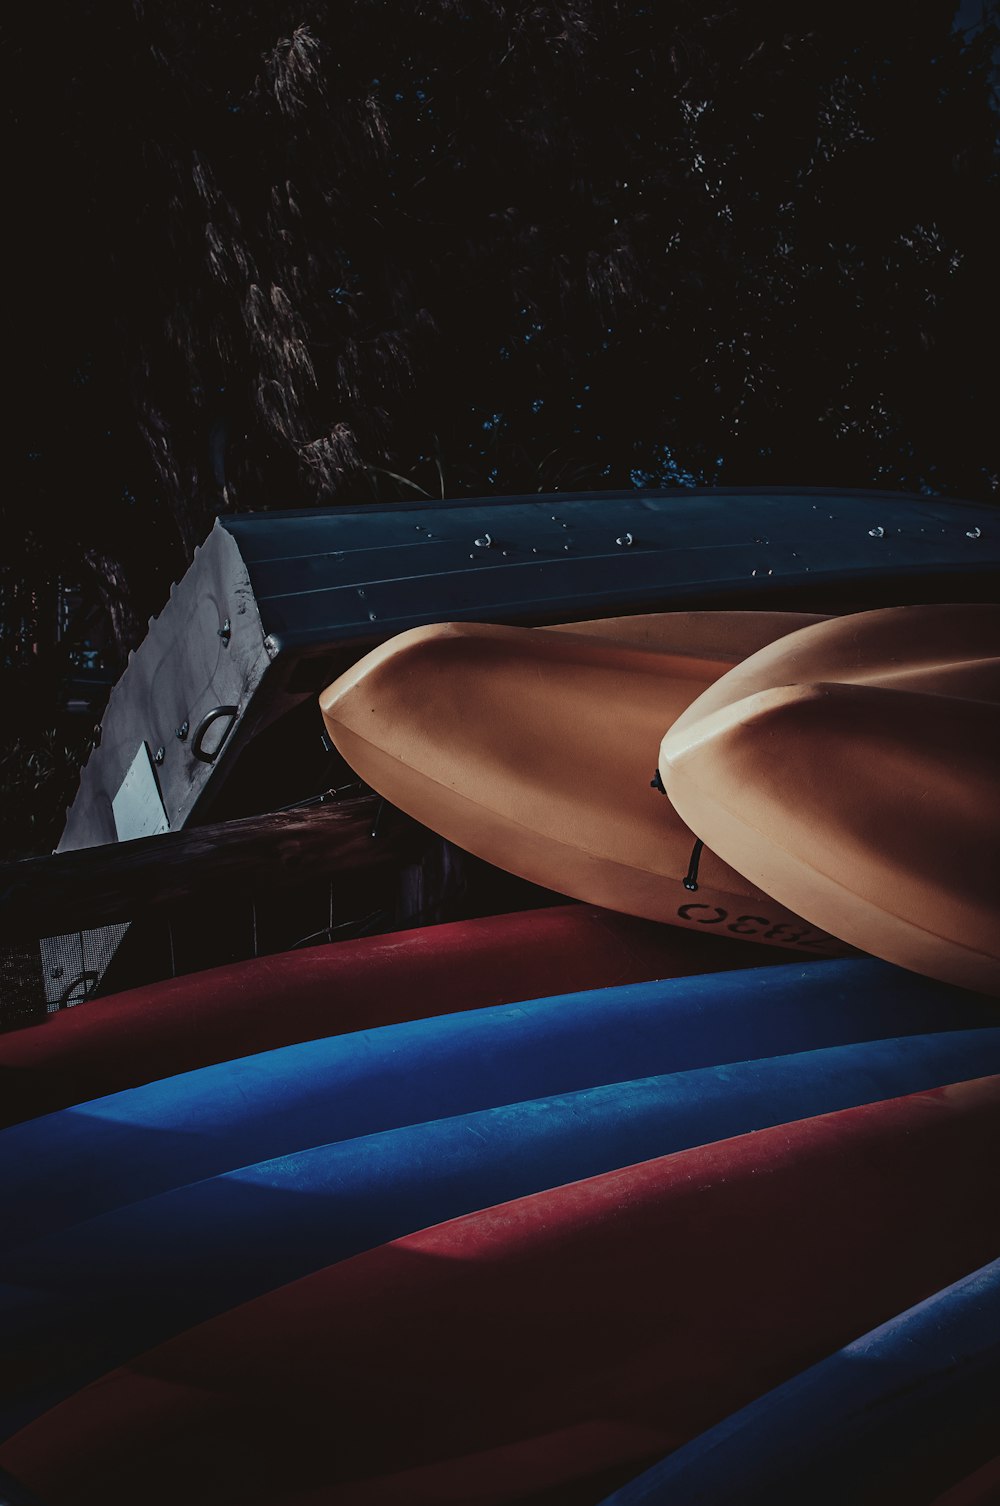 a group of surfboards sitting next to each other